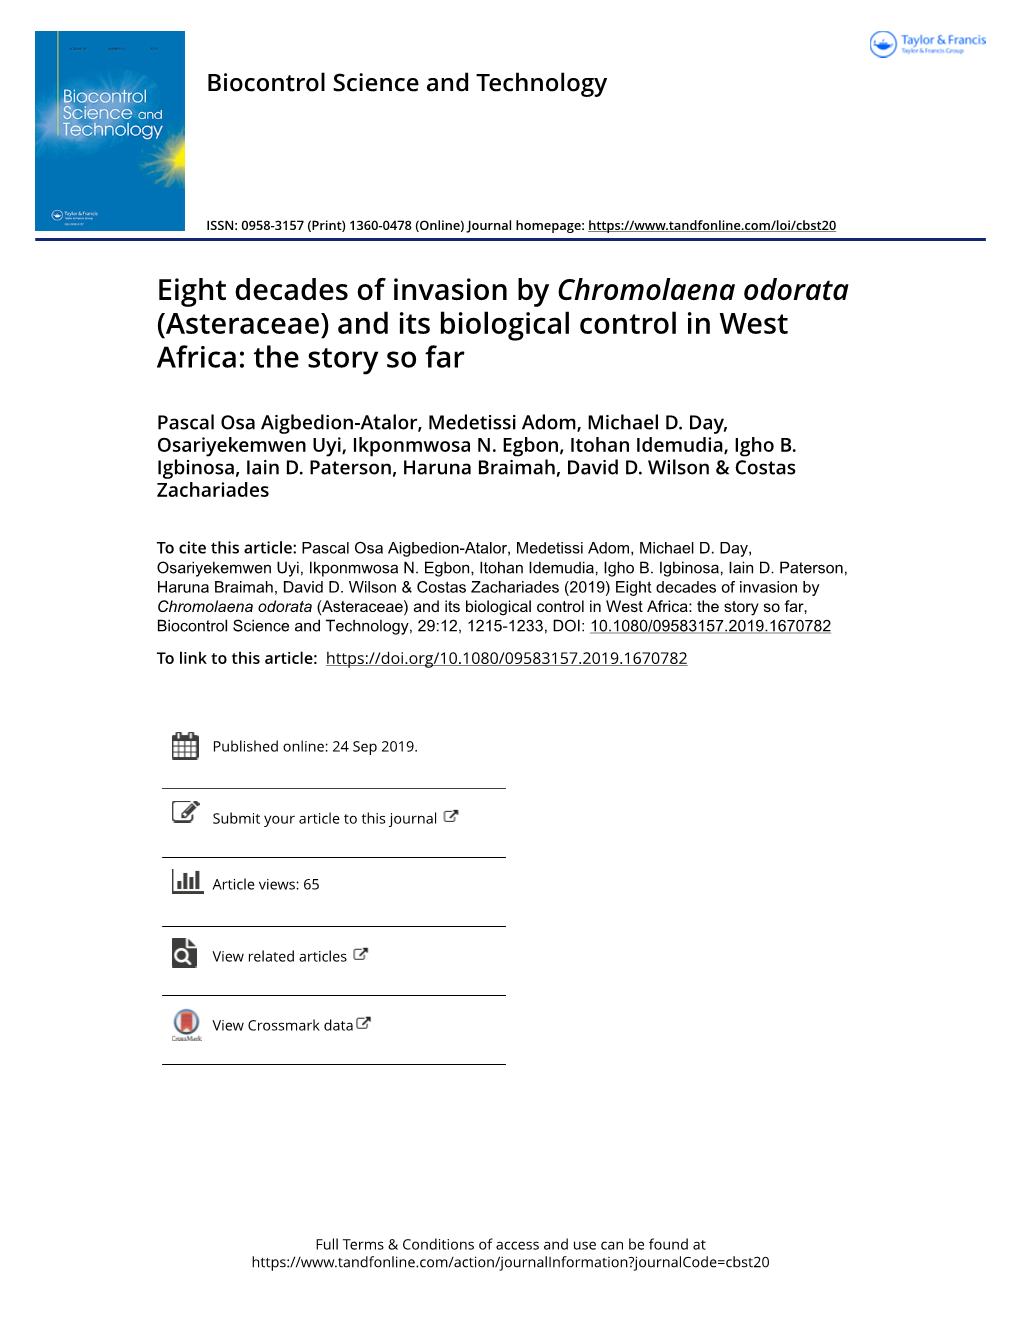 (Asteraceae) and Its Biological Control in West Africa: the Story So Far